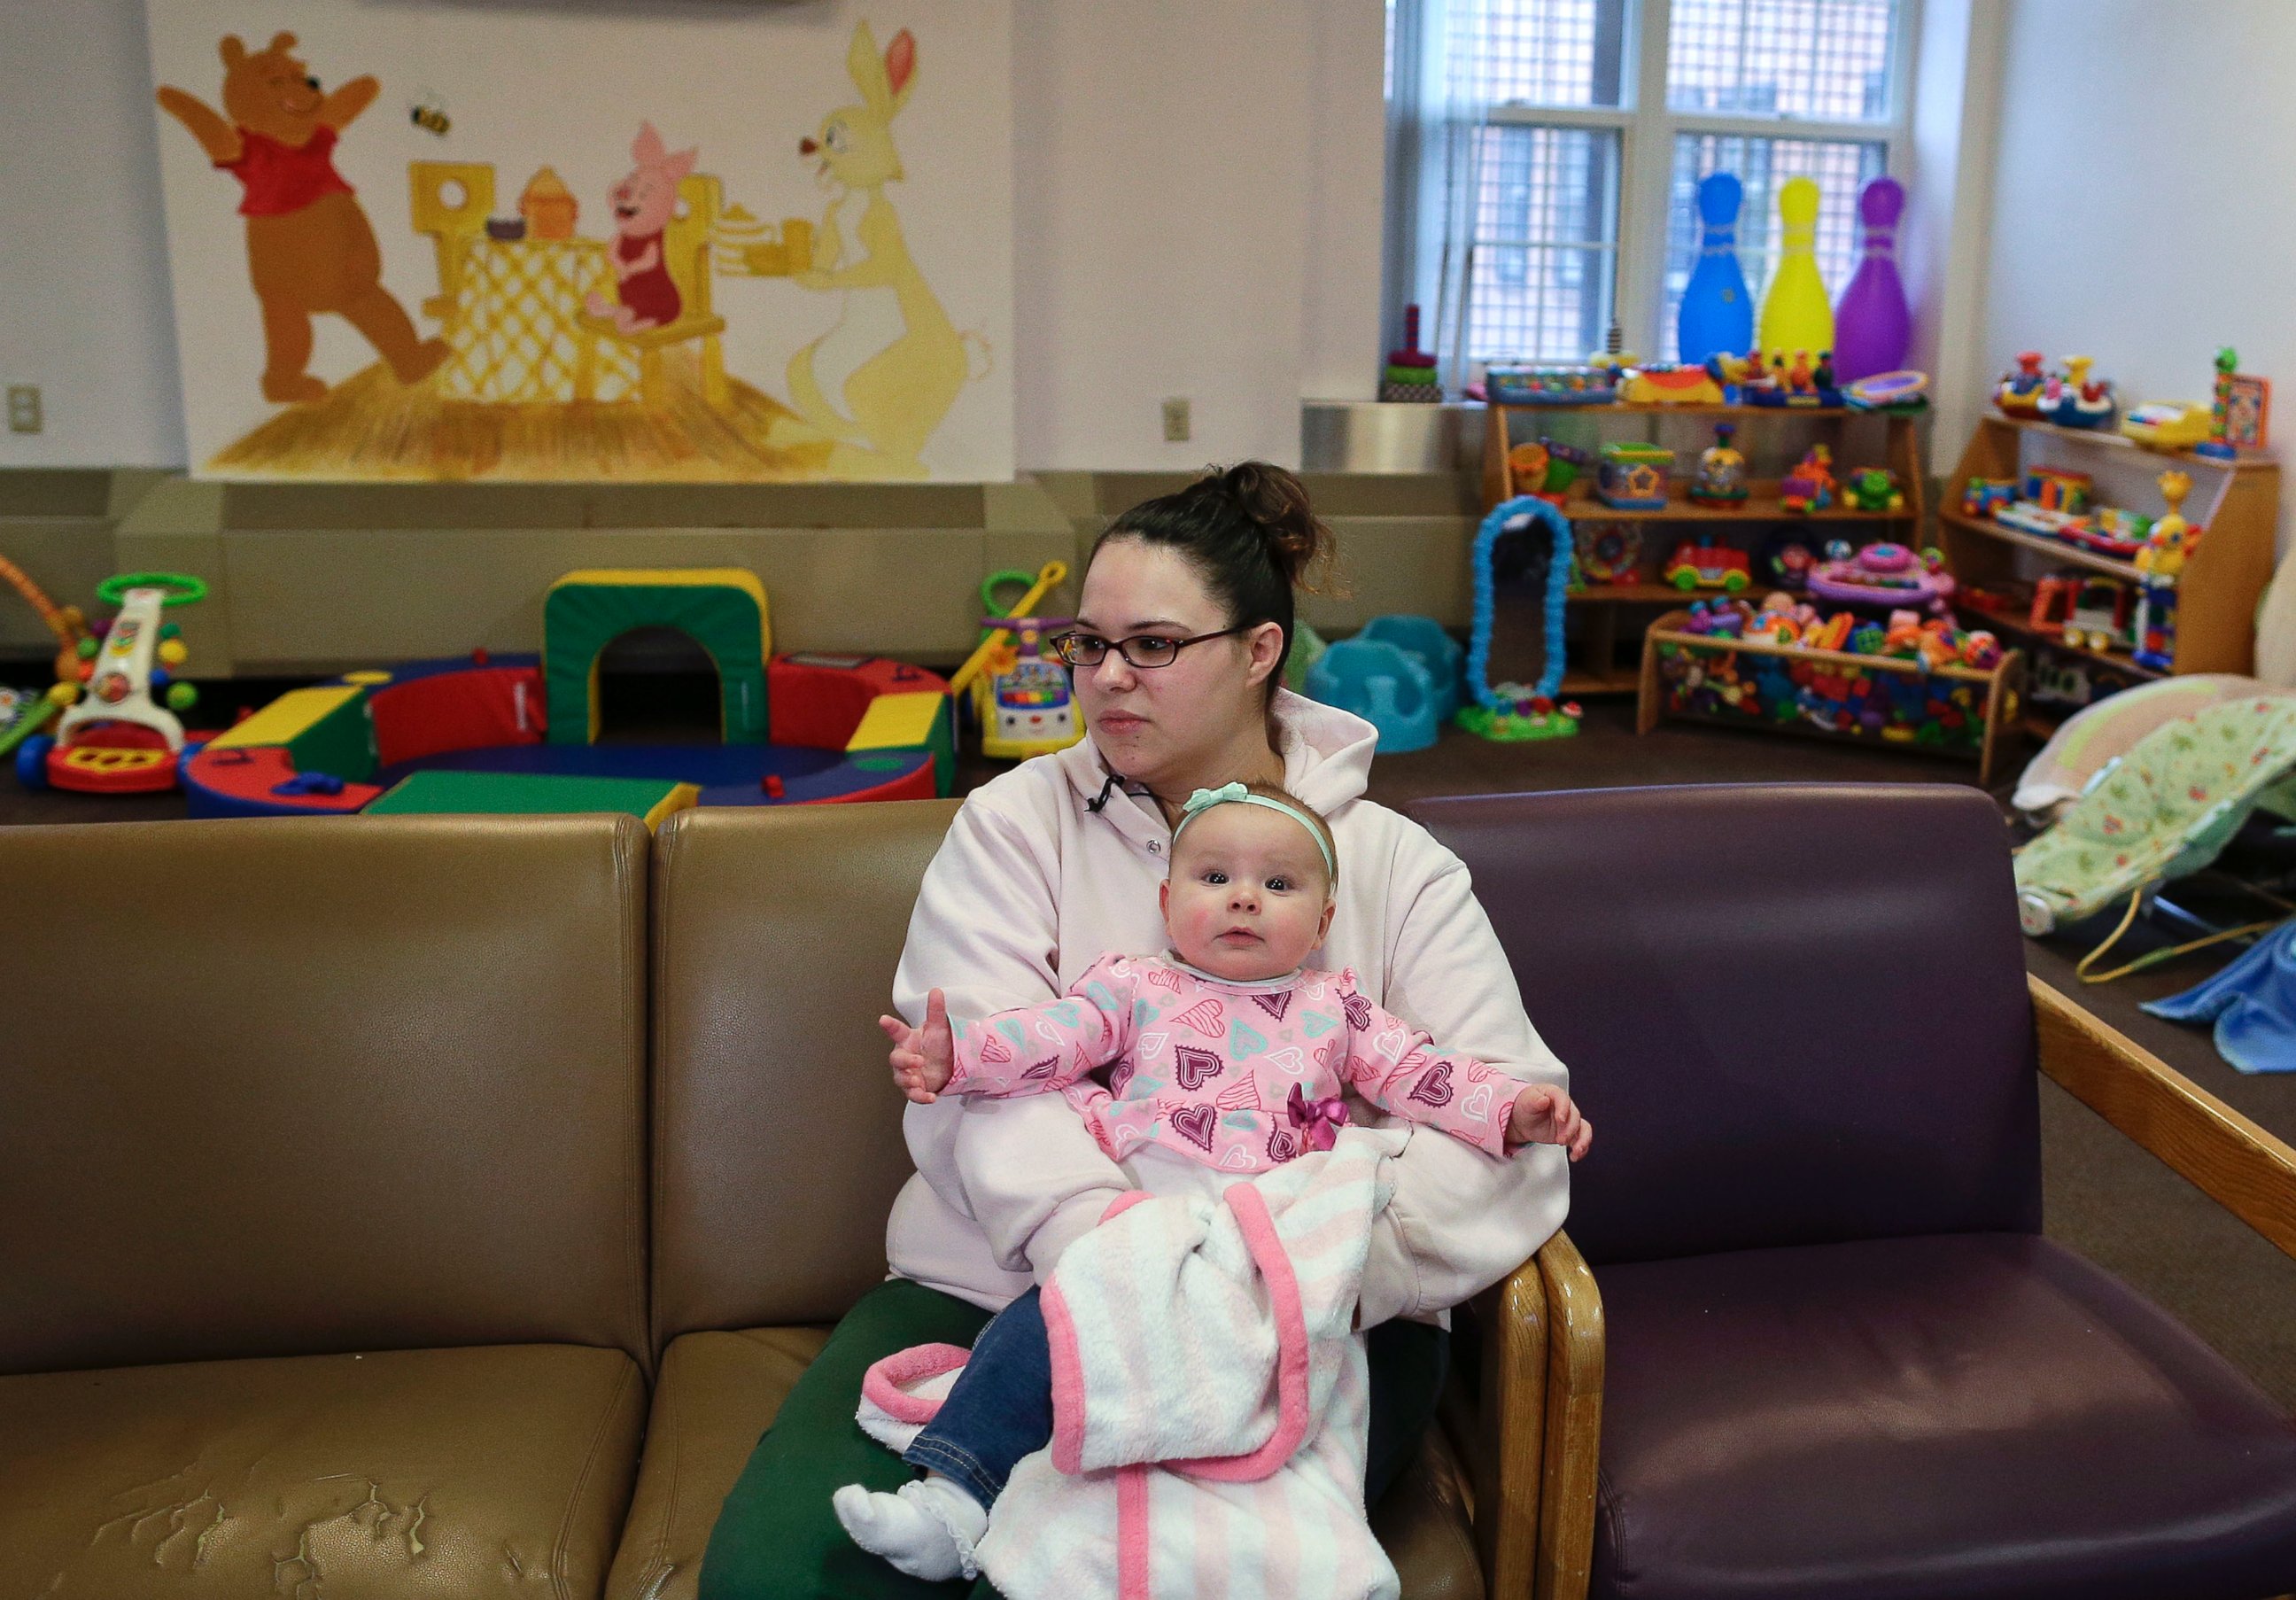 PHOTO: Jennifer Dumas answers questions during an interview while holding her daughter, Codylynn, in a playroom at Bedford Hills Correctional Facility, in Bedford Hills, N.Y., April 12, 2016.